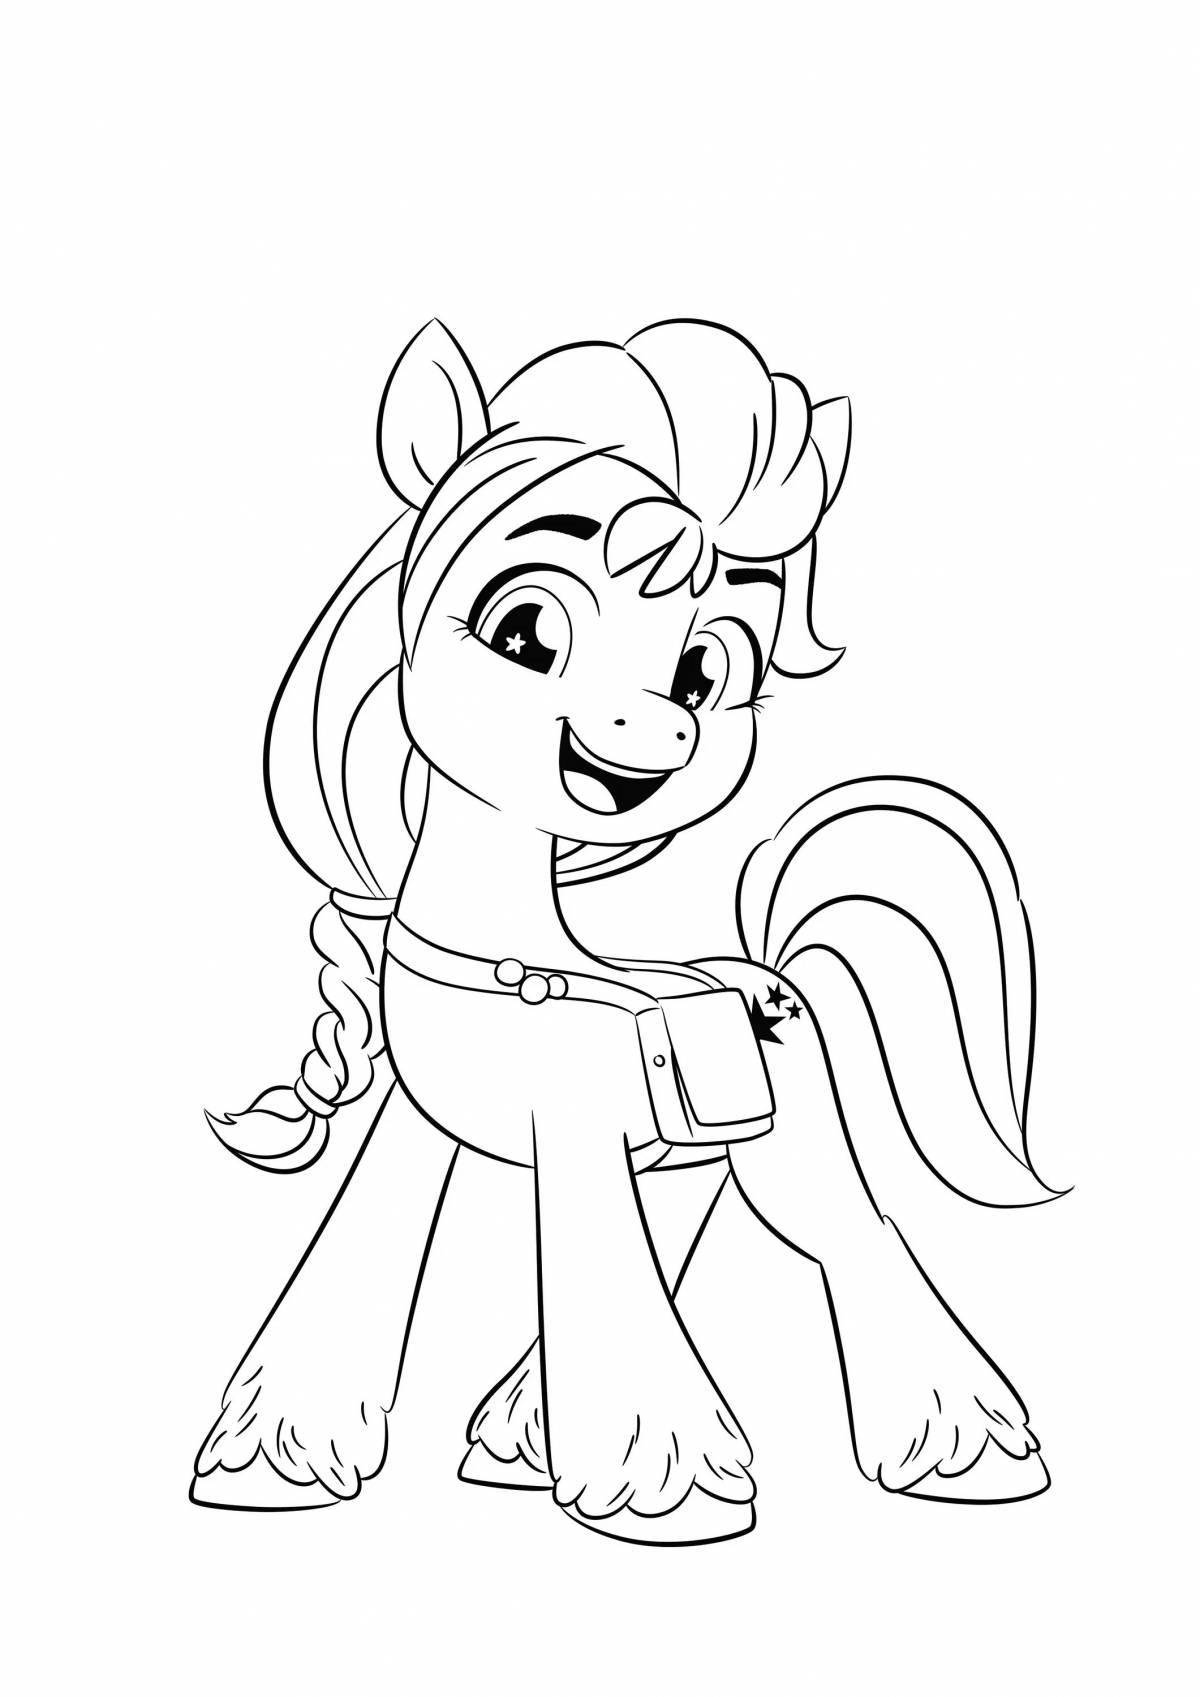 Charming new generation little pony coloring book